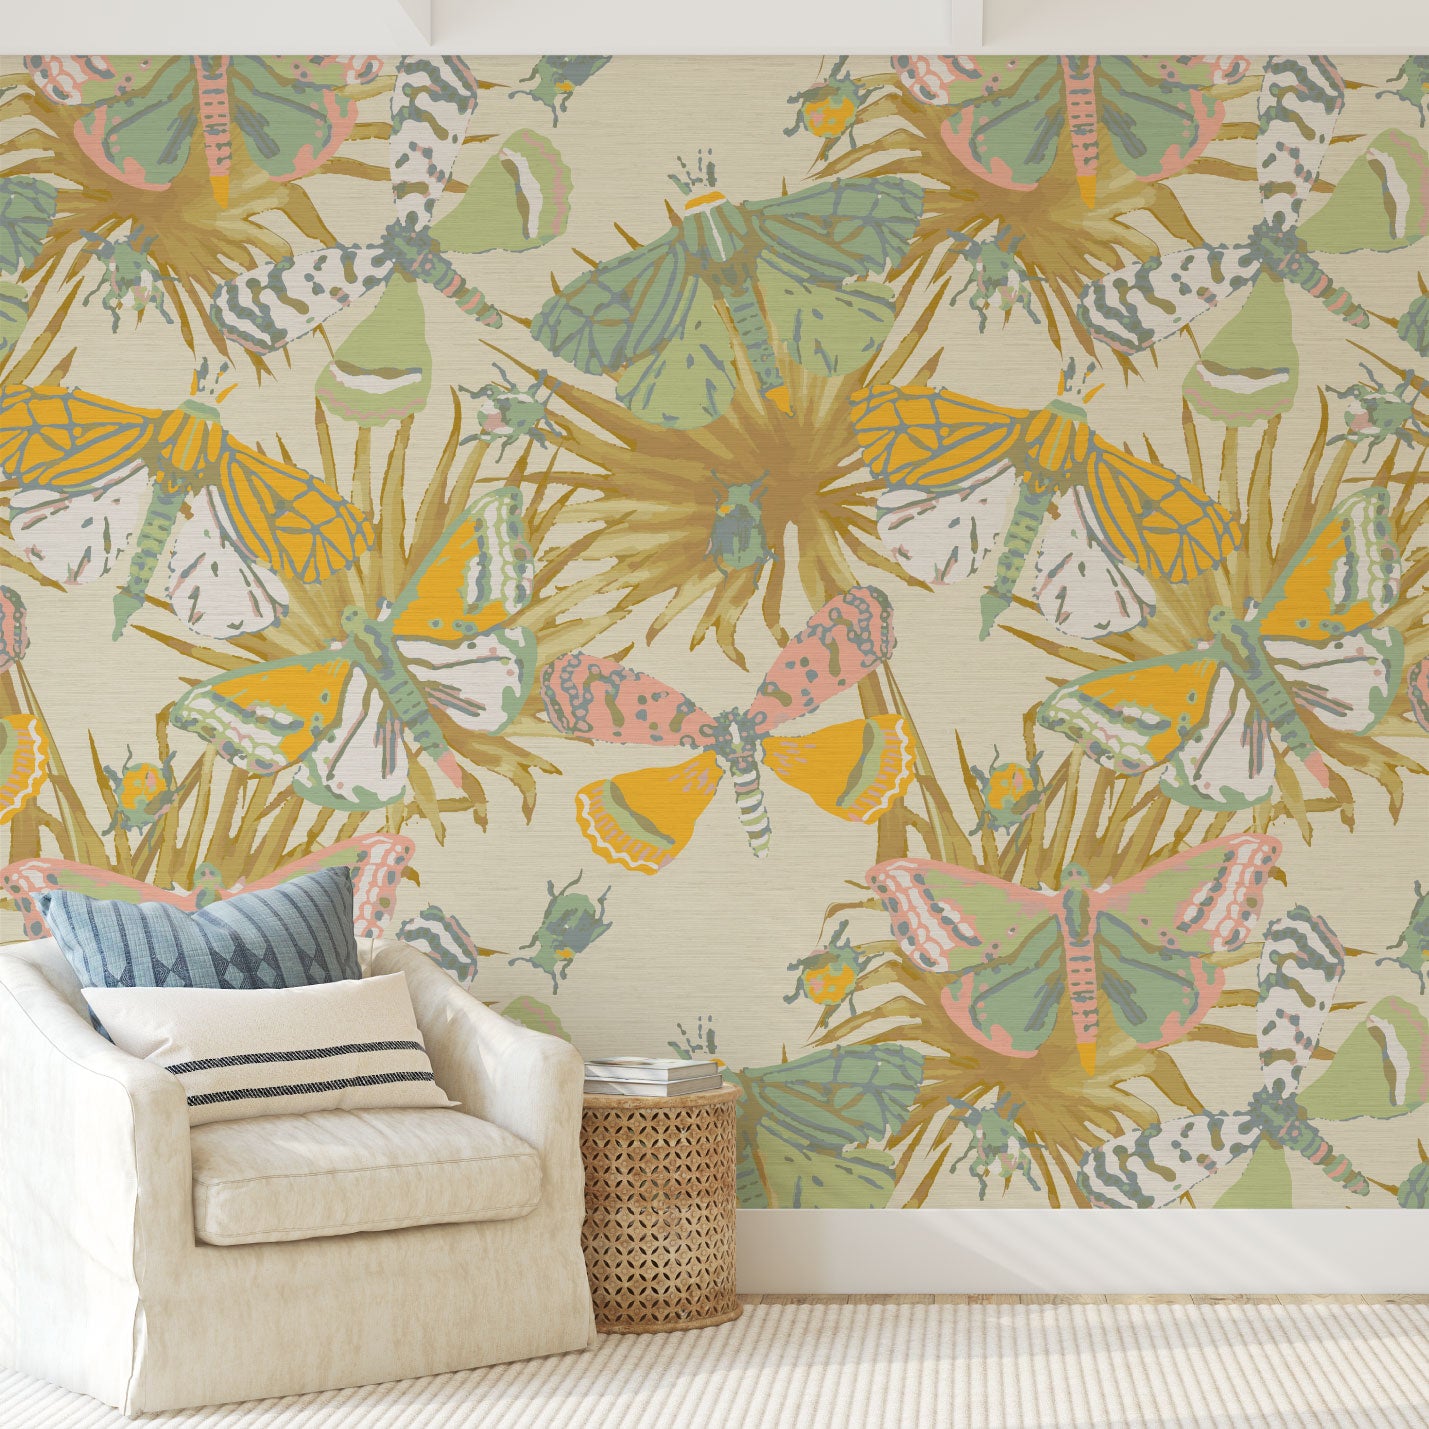 Load image into Gallery viewer, grasscloth printed wallpaper with pale blue base and subtle olive, tan and brown palm leafs as base print with oversized multi colored butterflies layered on top. Butterflies and bugs are designed using a range of pastel pinks, light olive, dusty blue, gold and off white.
